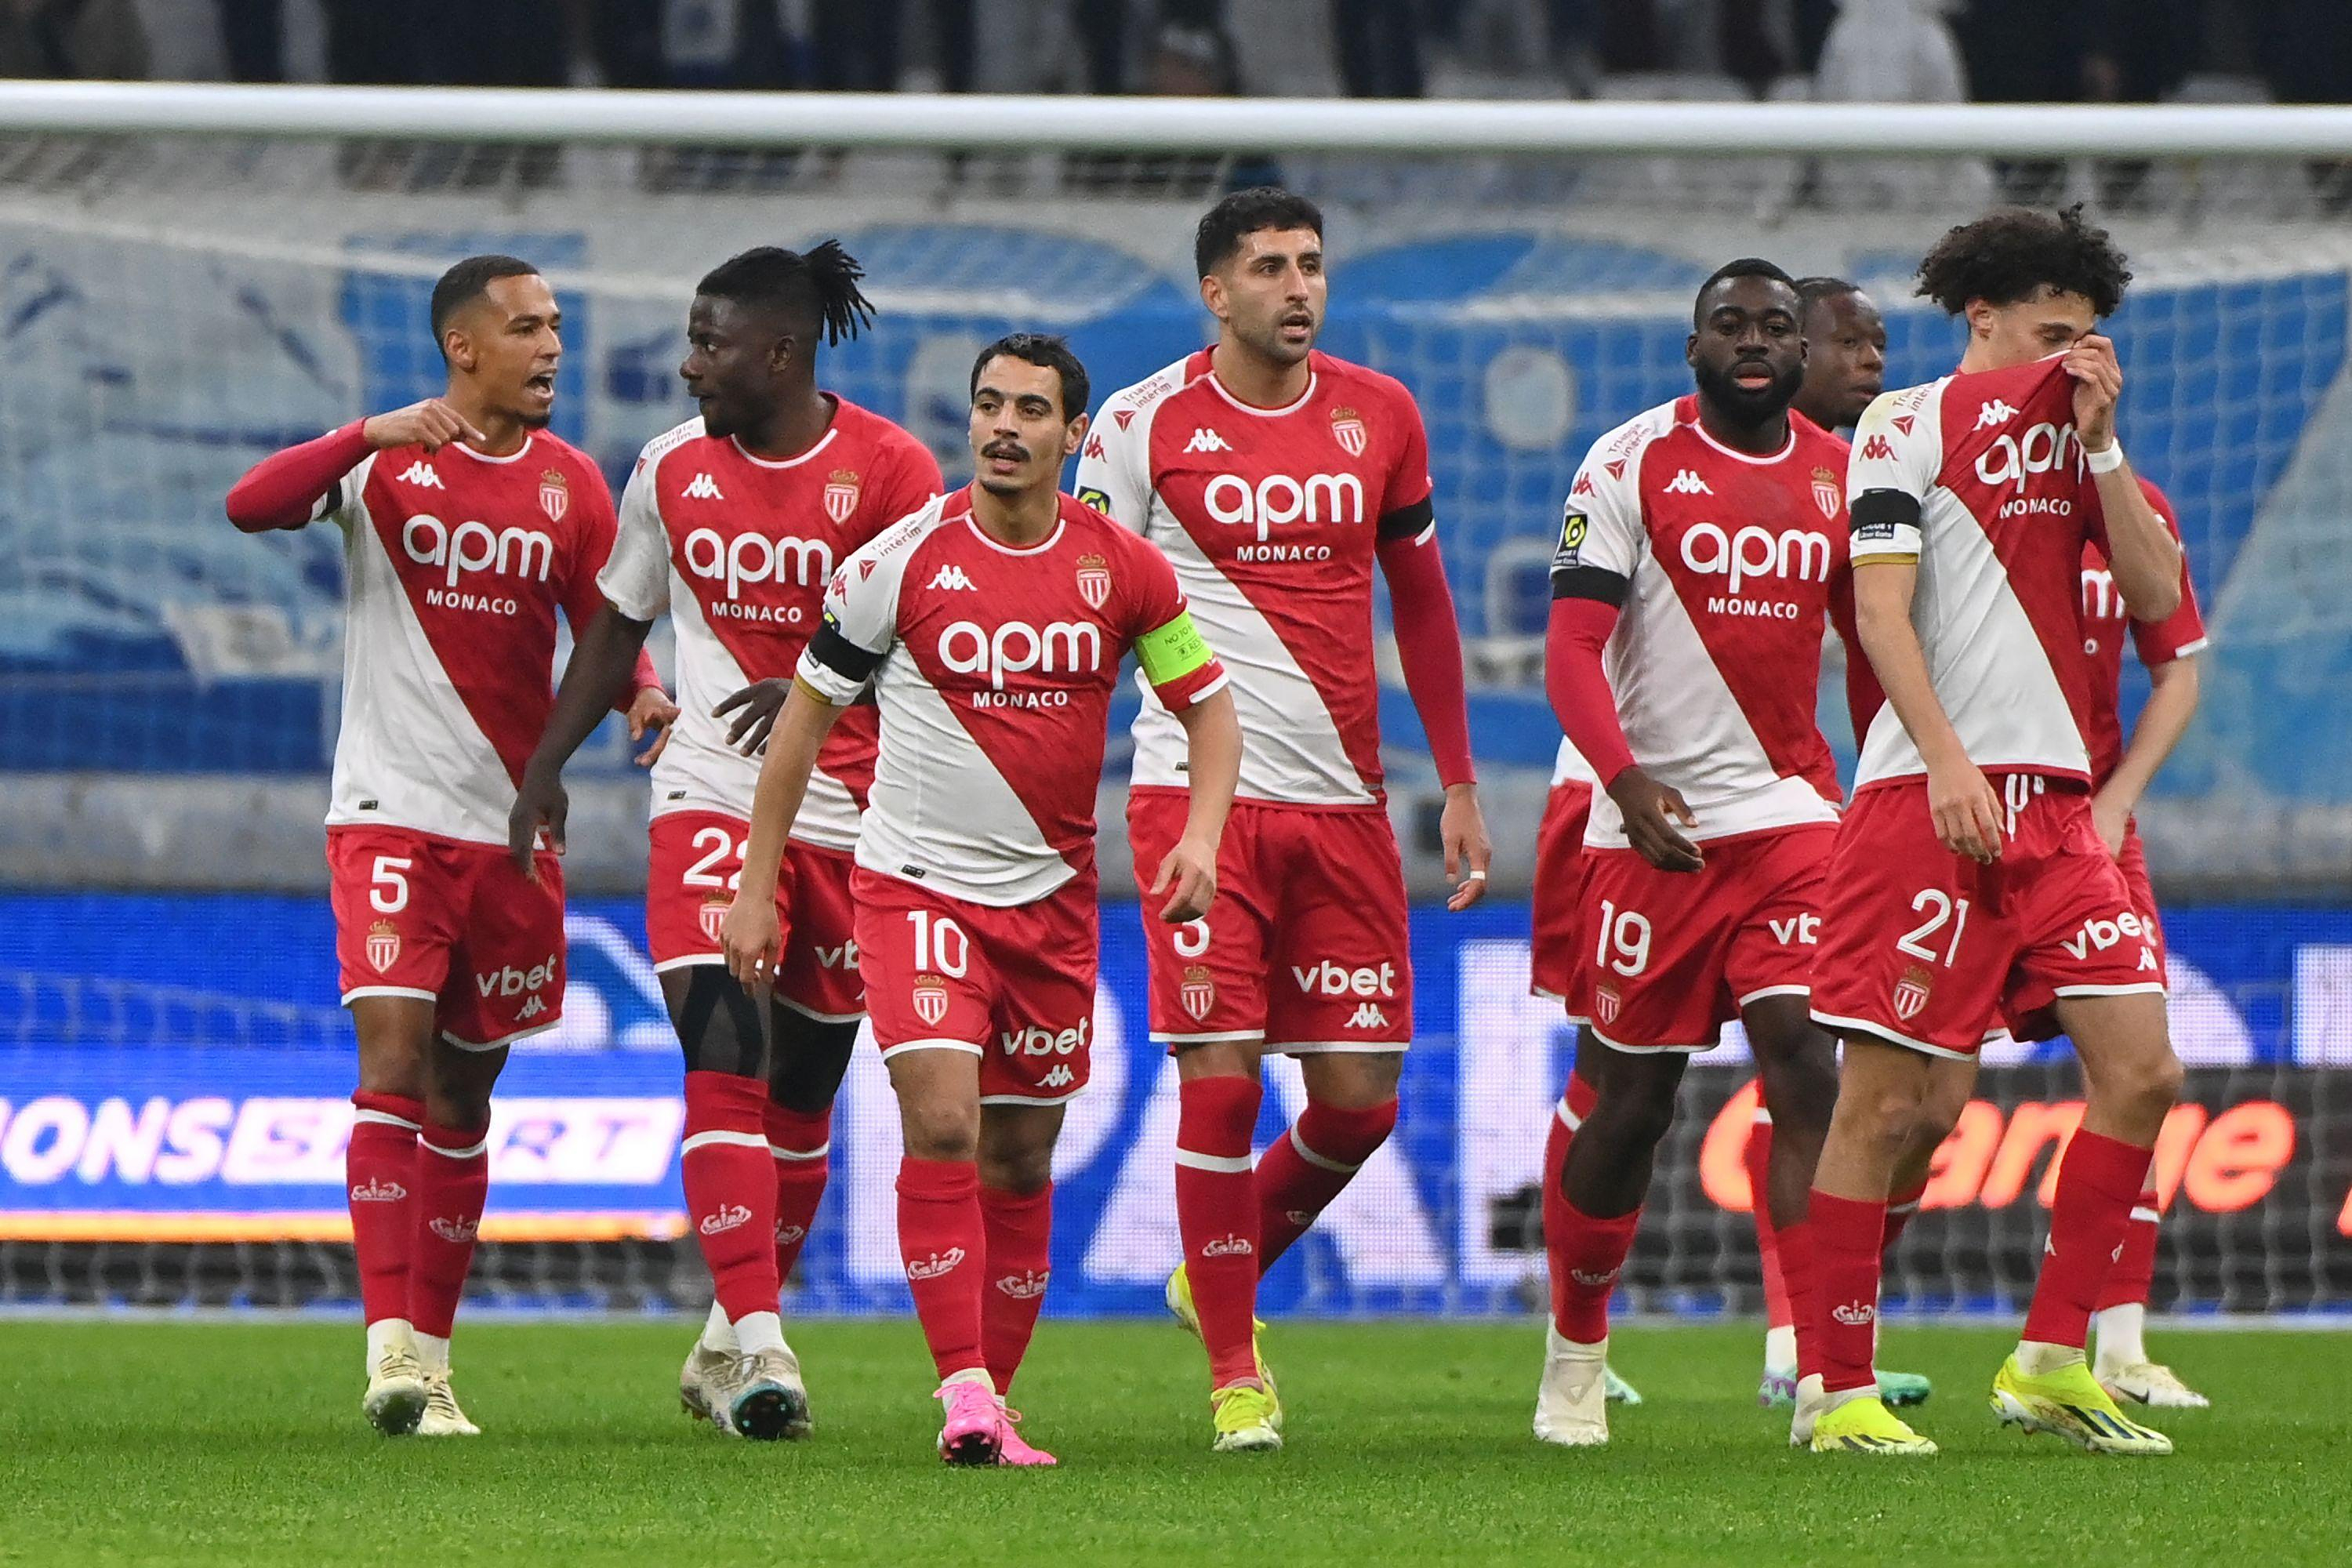 Ligue 1: Monaco with Ben Yedder, Ayew on the Le Havre bench... the line-ups